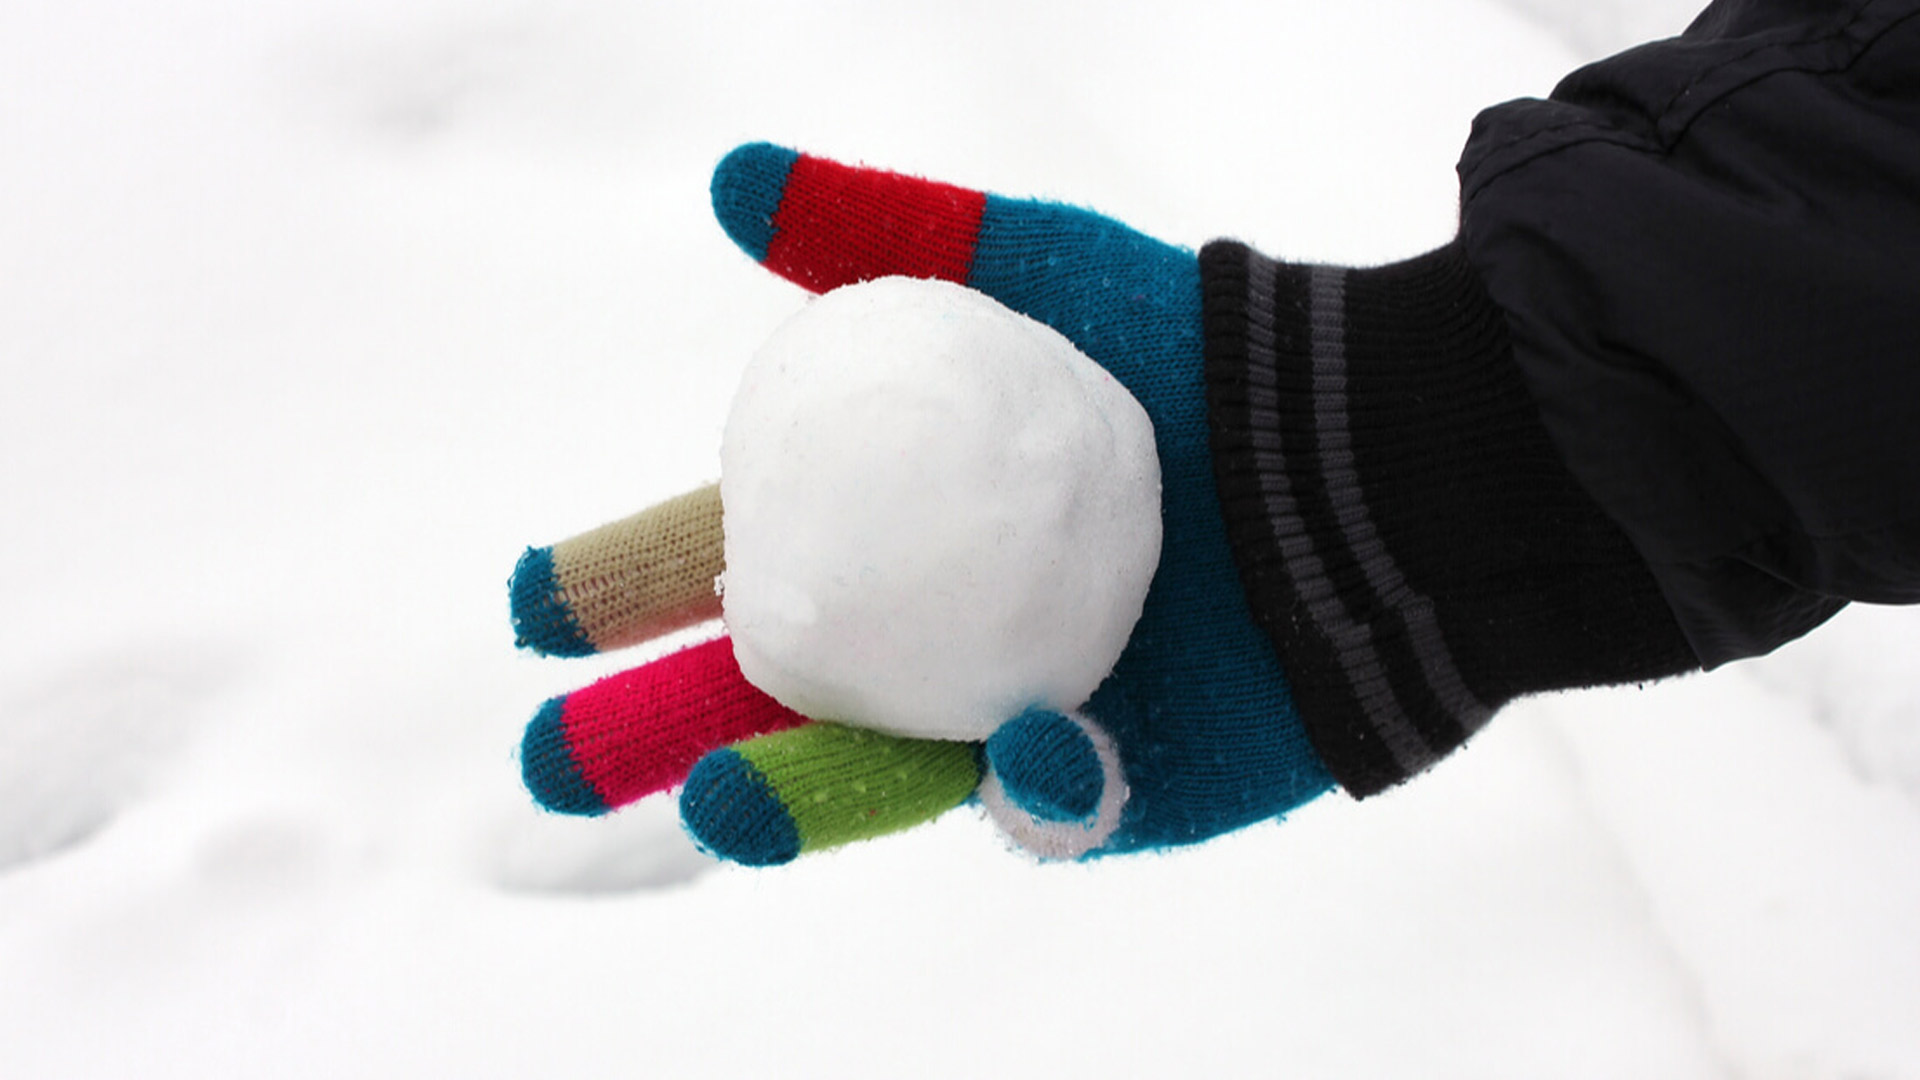 An image of a gloved hand with a snowball in it. Debt snowball: approach to debt management